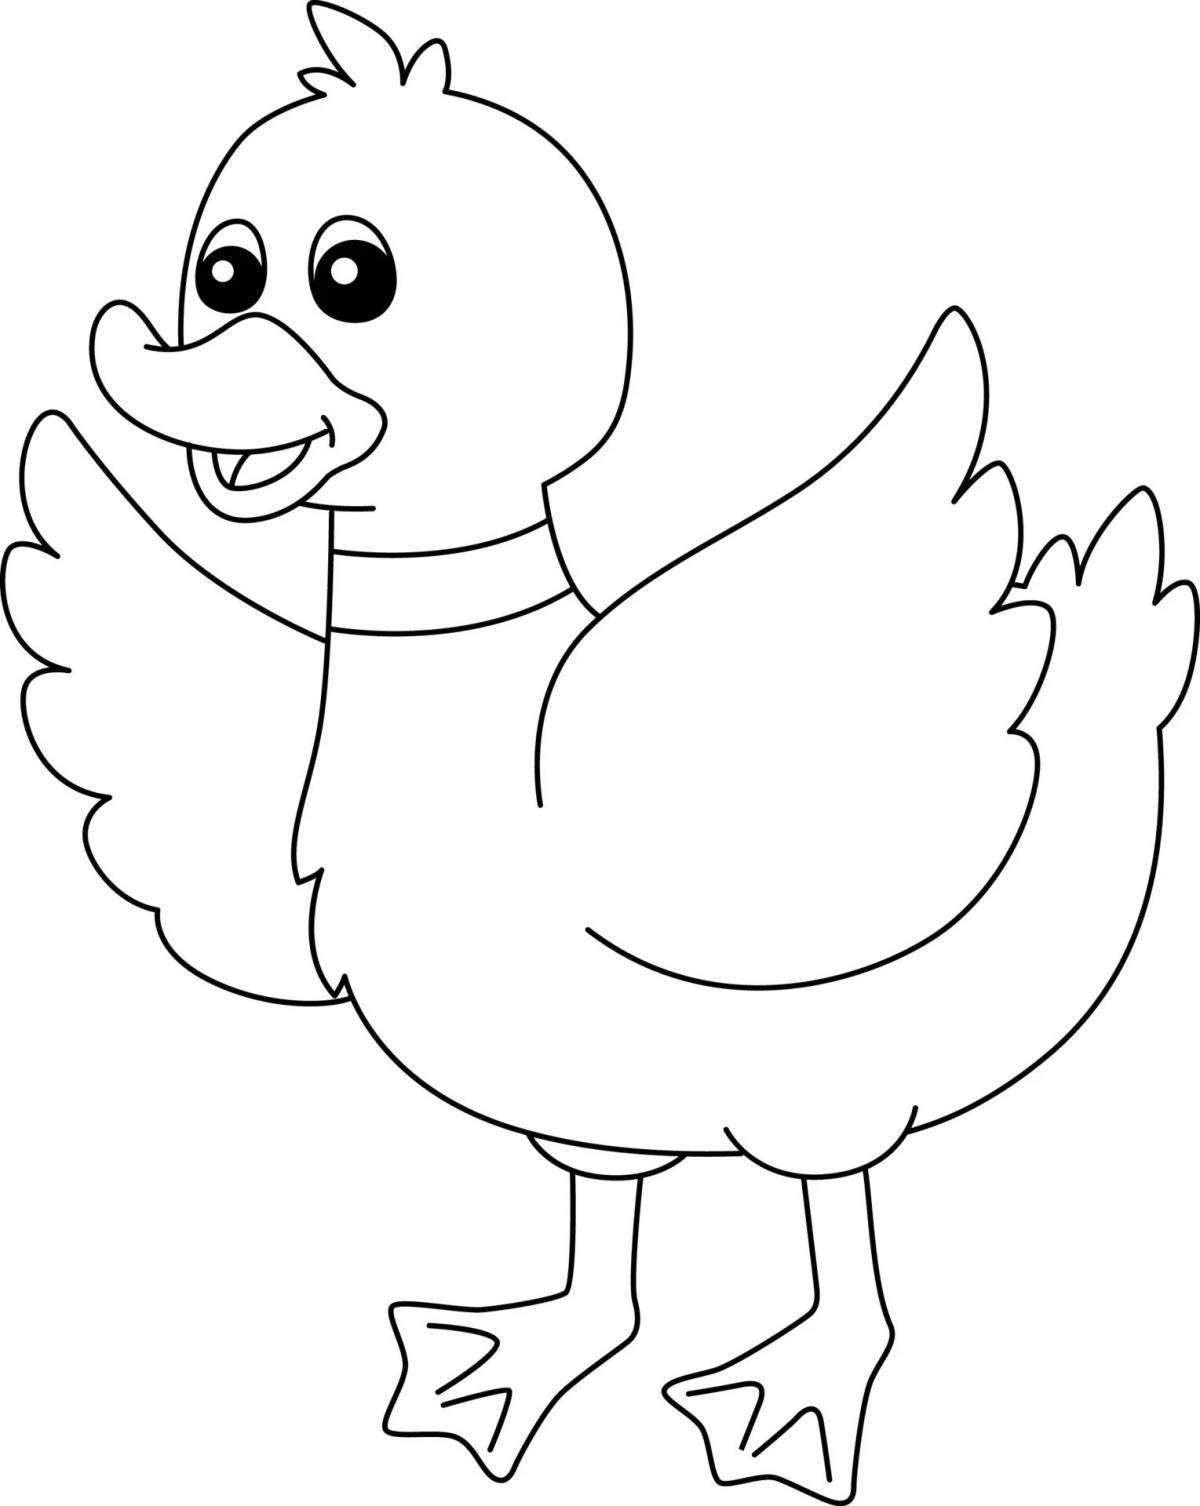 Exciting lalanfant duck coloring page